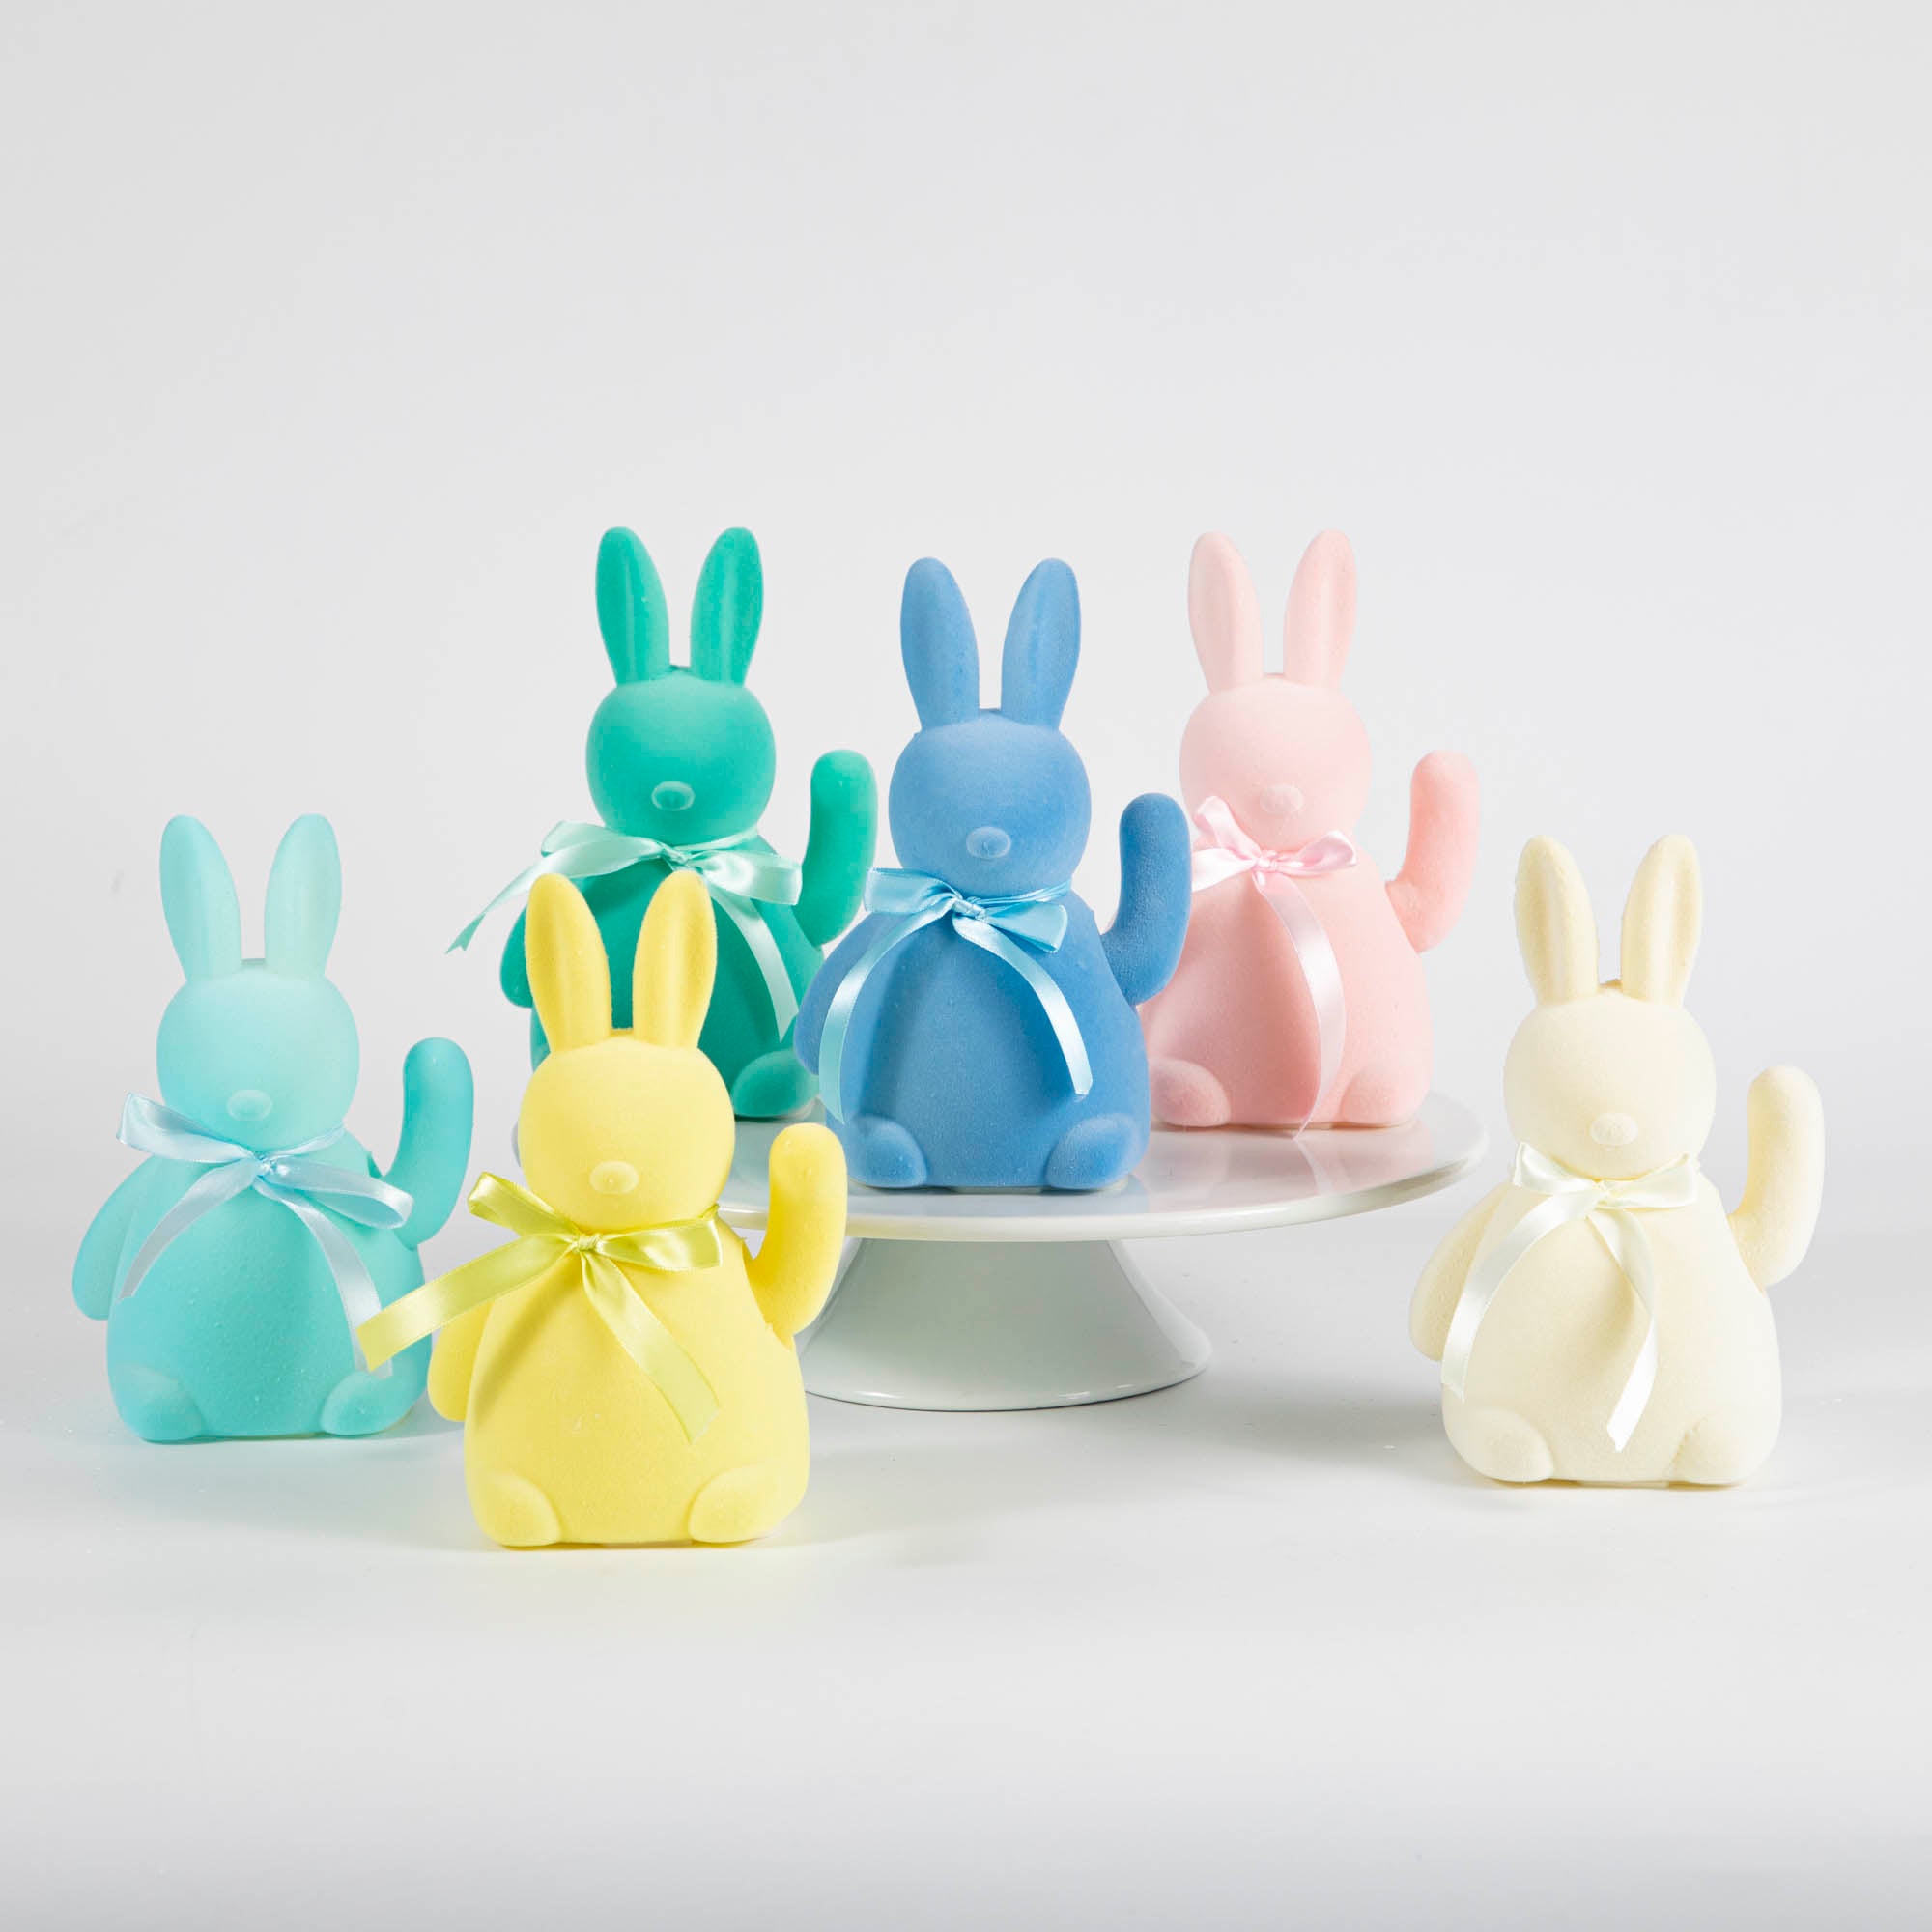 A group of Glitterville waving flocked bunny figurines on a white plate, perfect for the Easter season.